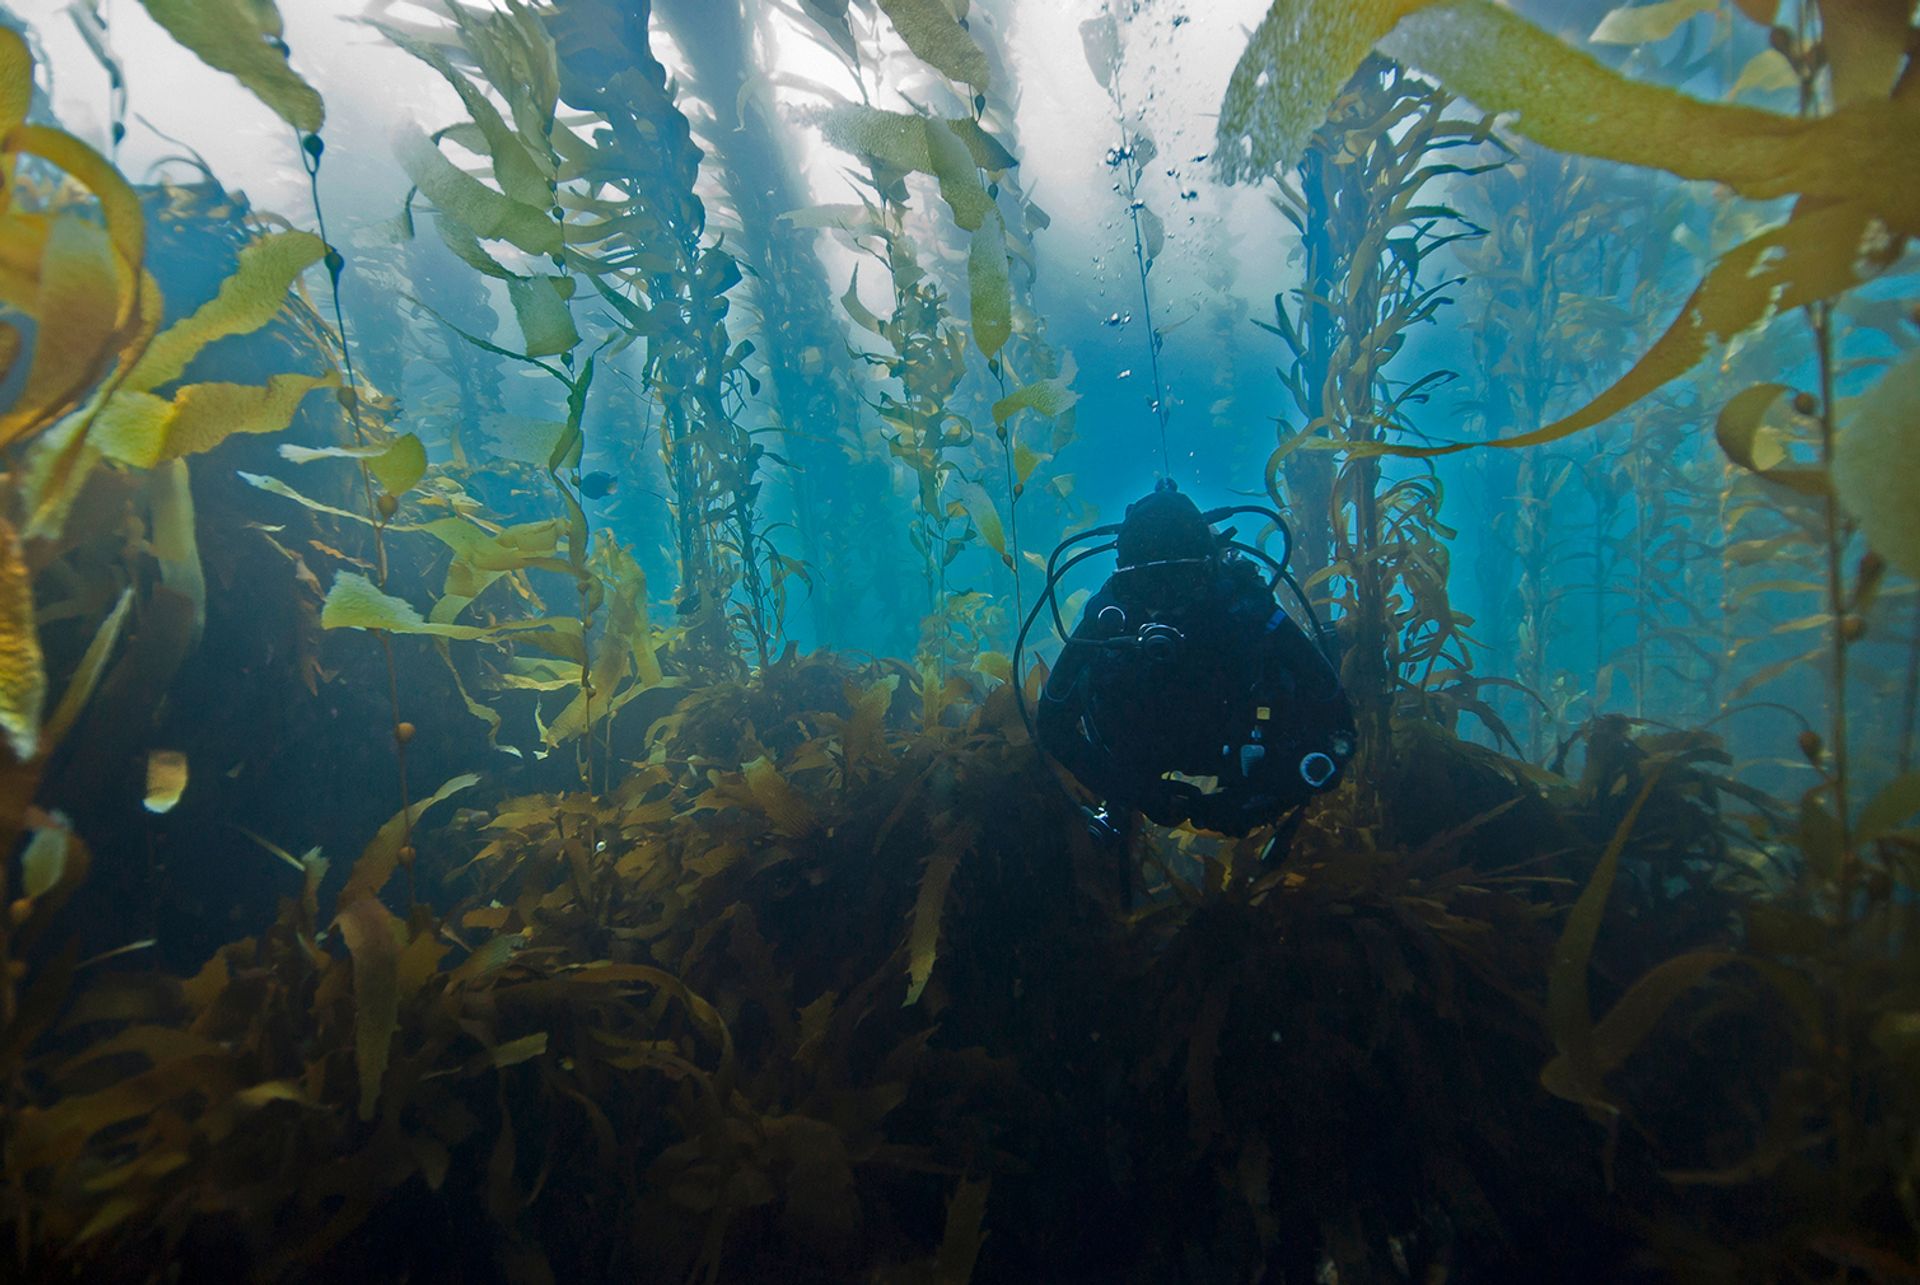 In great part thanks to Platform Earth, some oceanic kelp forests—specifically those around the south coast of the UK which had shrunk to 4% of their former size—are staging a comeback. Courtesy of Platform Earth